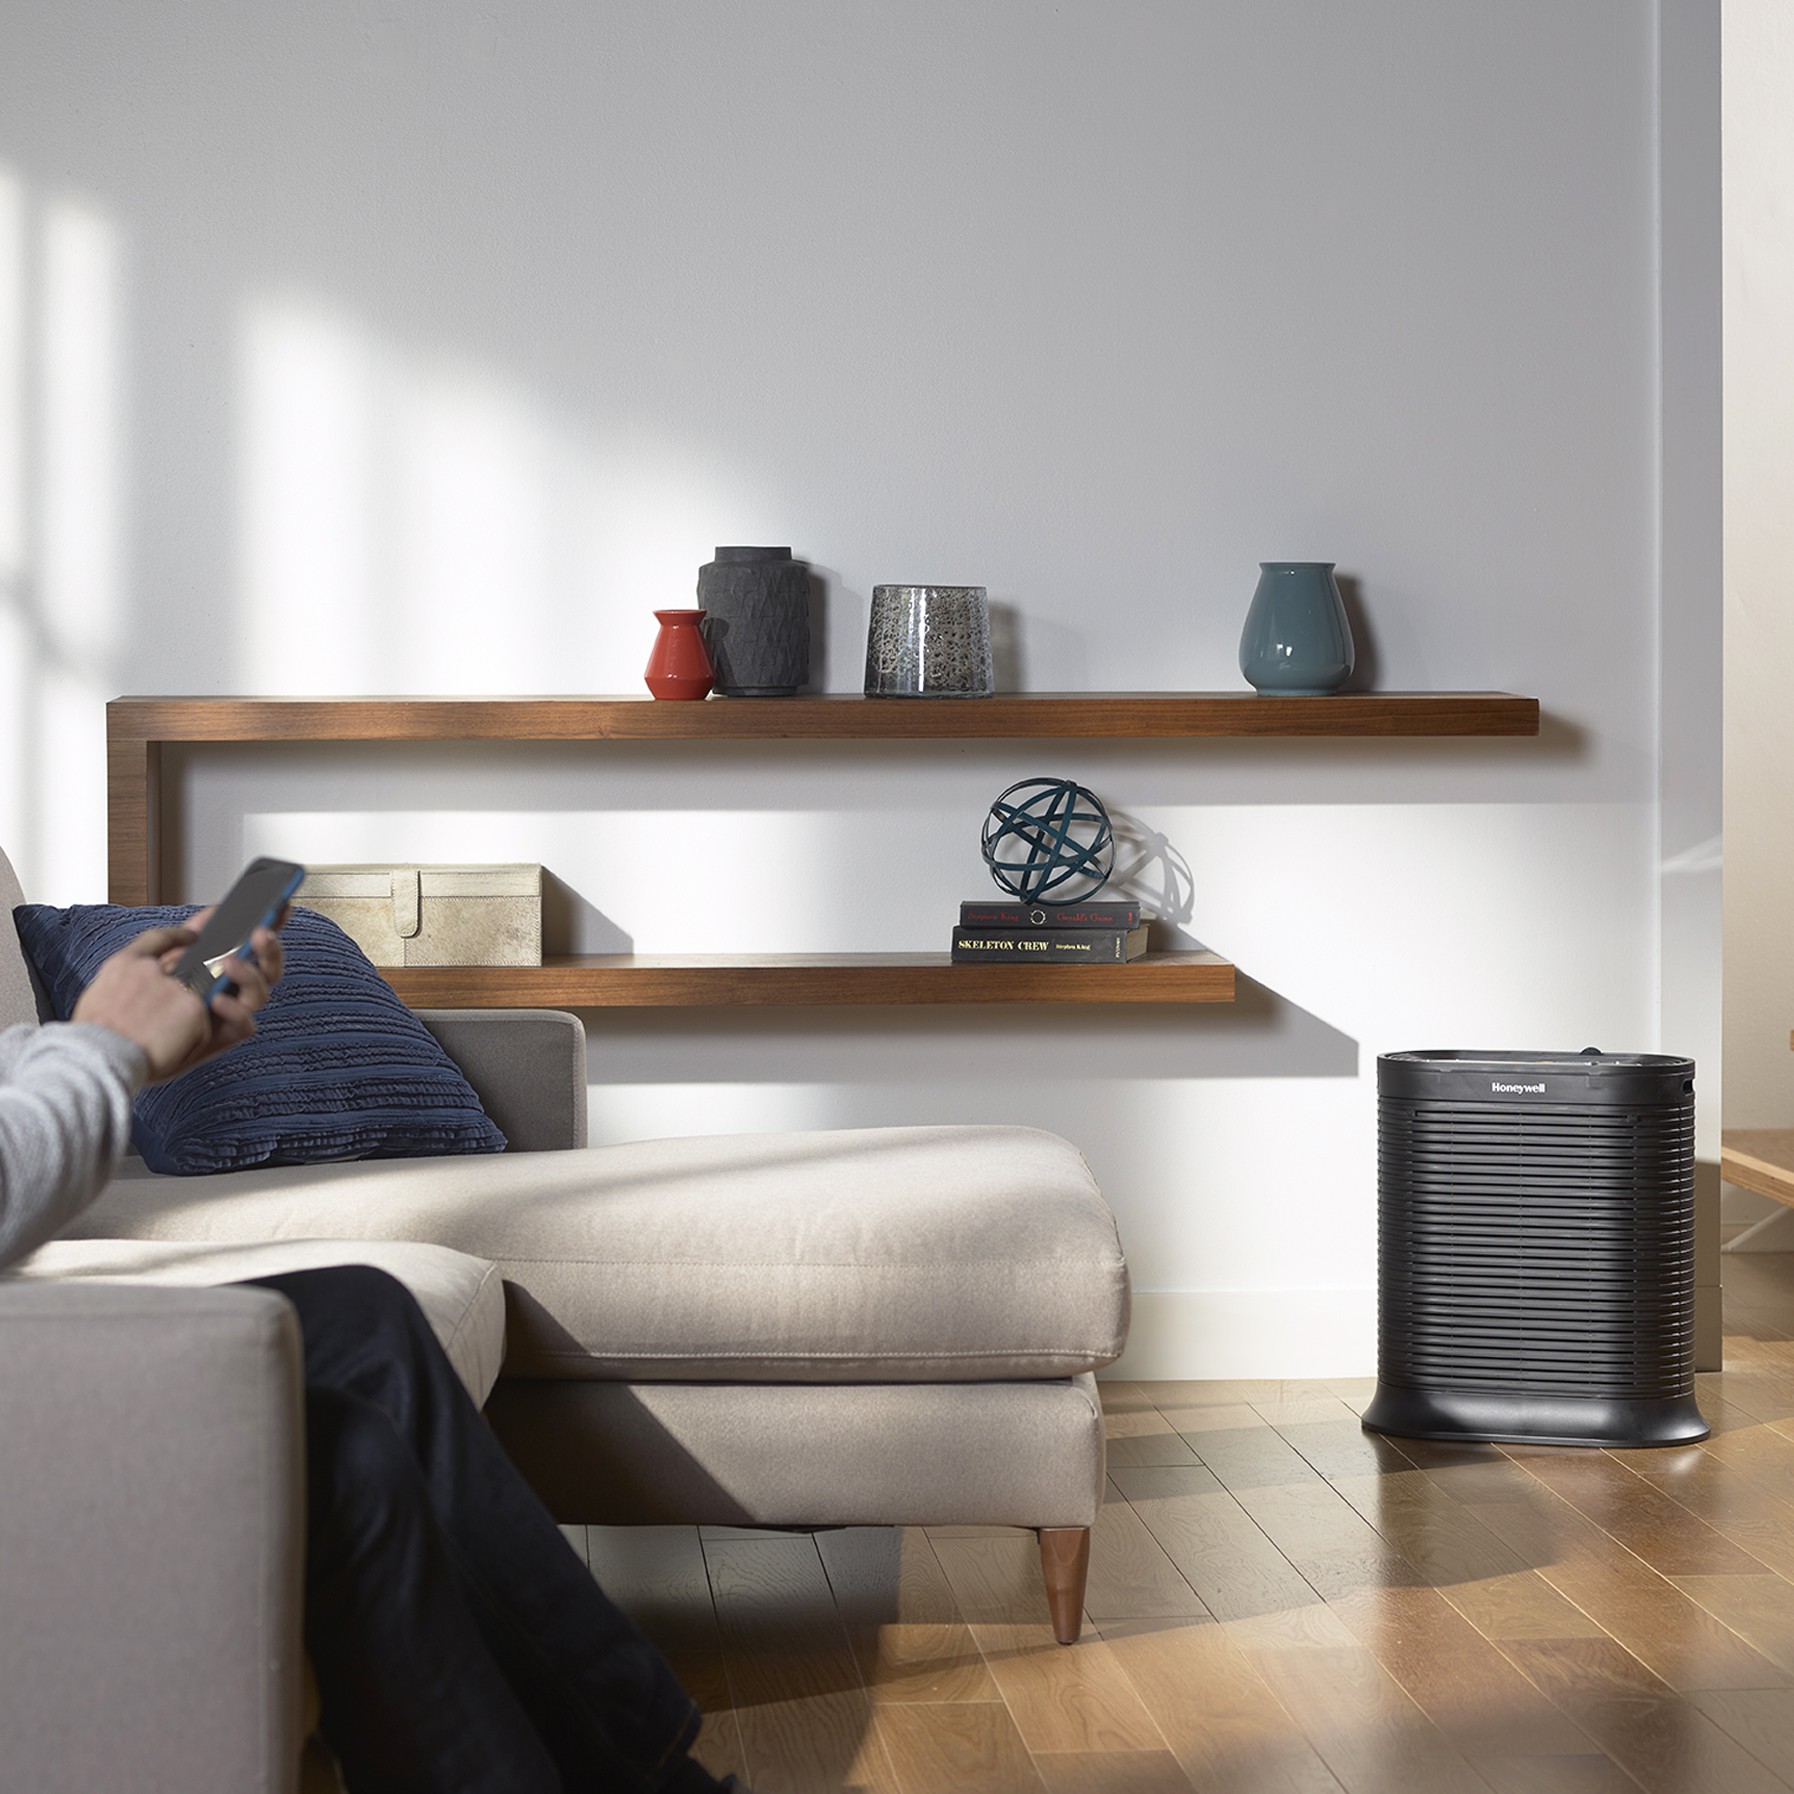 Honeywell Bluetooth HEPA Air Purifier for Large Rooms (310 sq ft), Black, HPA250B - image 4 of 6